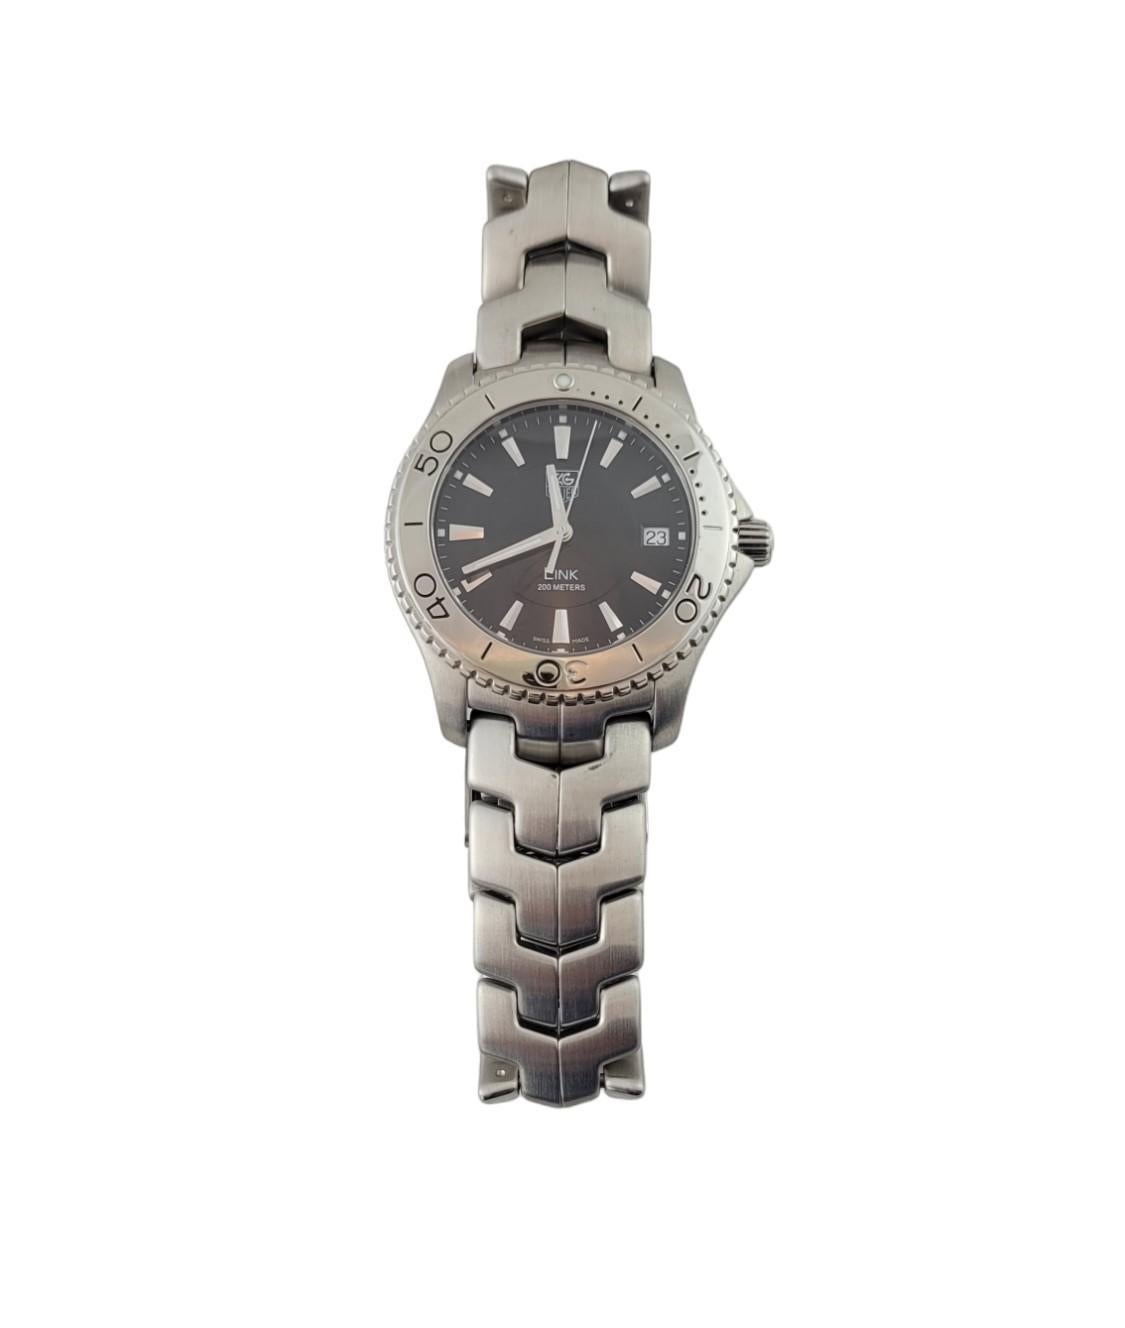 Tag Heuer Link Watch 39mm Quartz WJ1110-0 Stainless #17228 For Sale